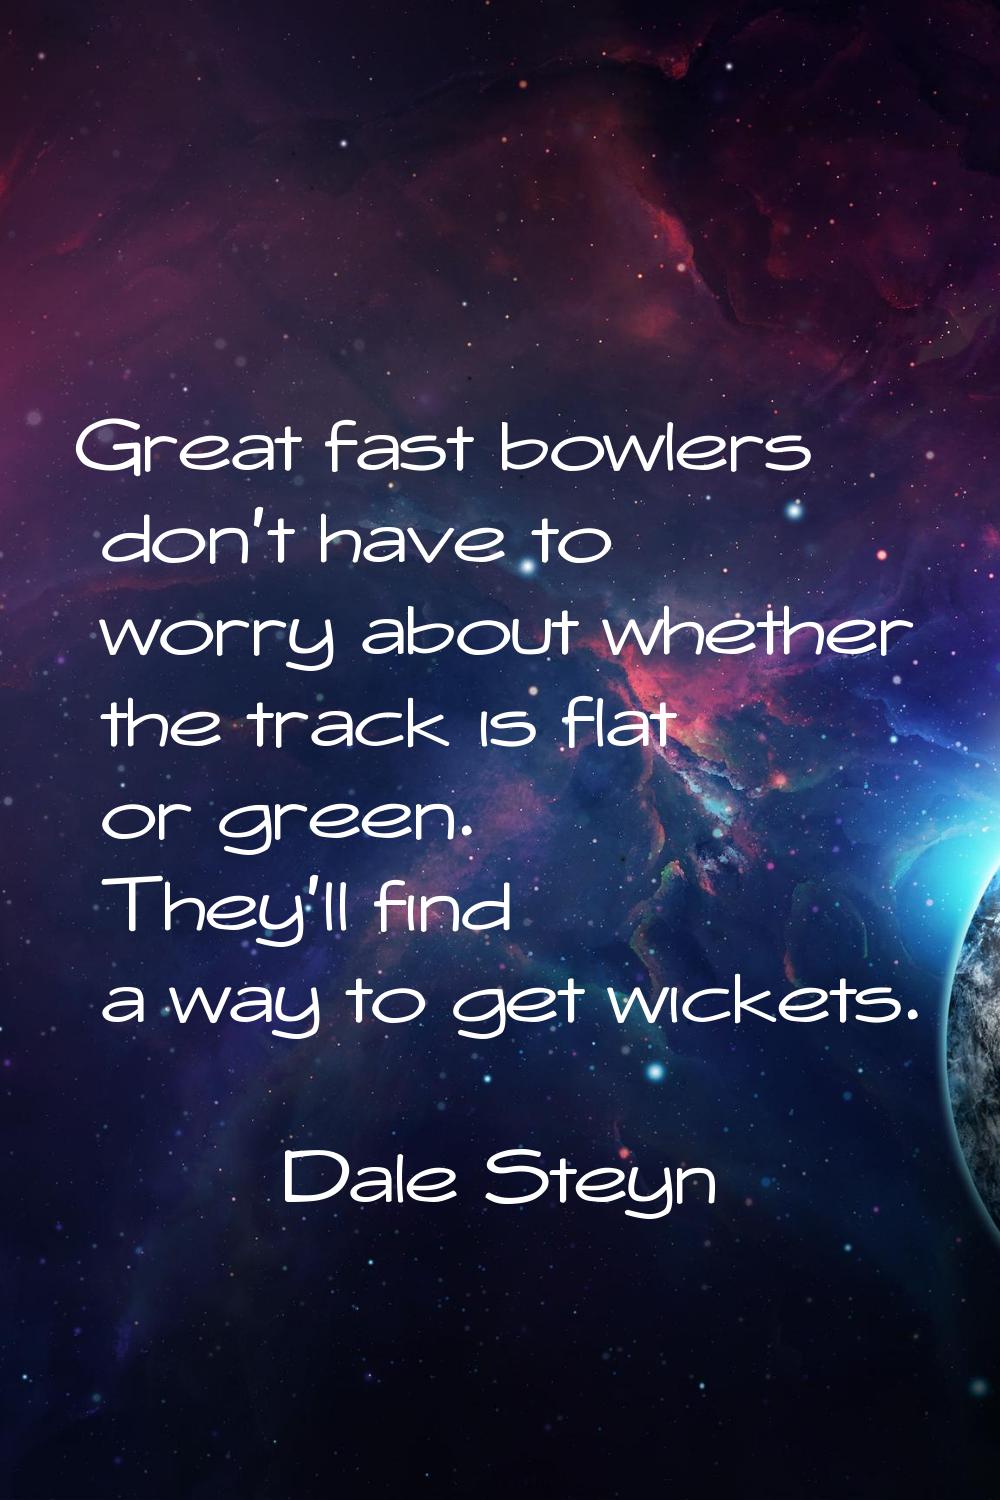 Great fast bowlers don't have to worry about whether the track is flat or green. They'll find a way